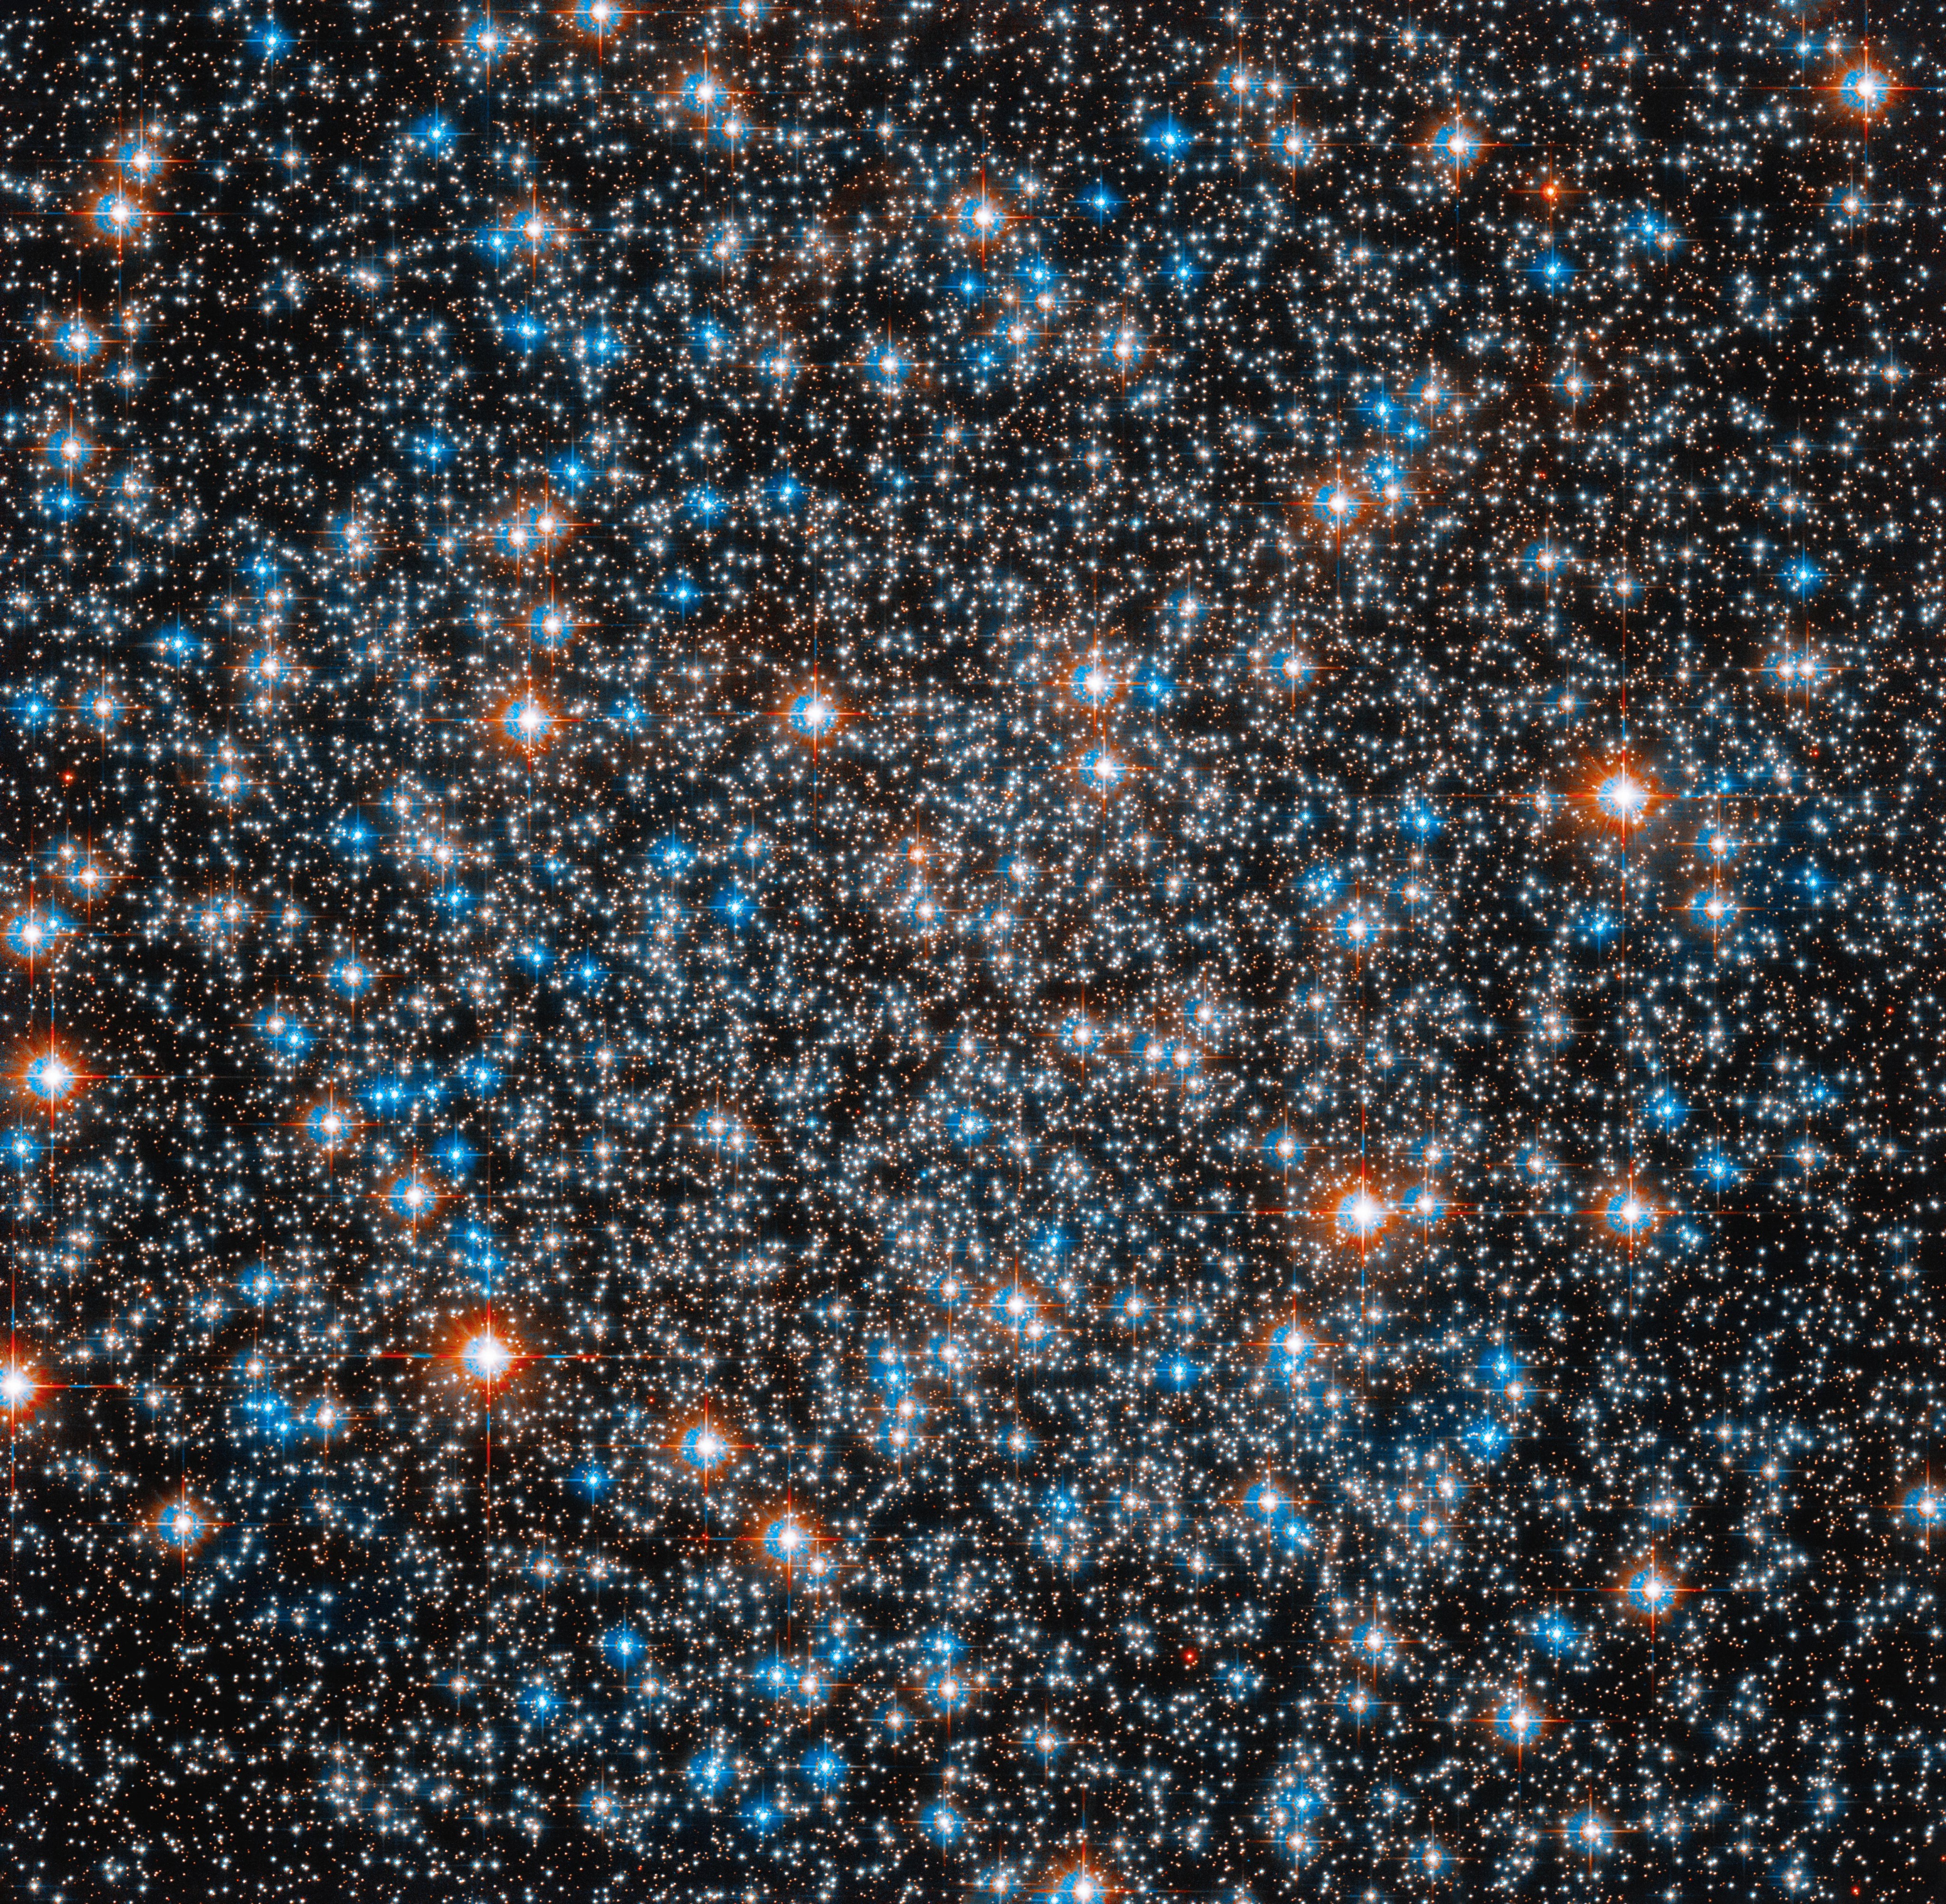 Field is filled with white stars, smattered with blue-white and reddish-orange stars. Stars are concentrated at the center of the image. All are on a black background.